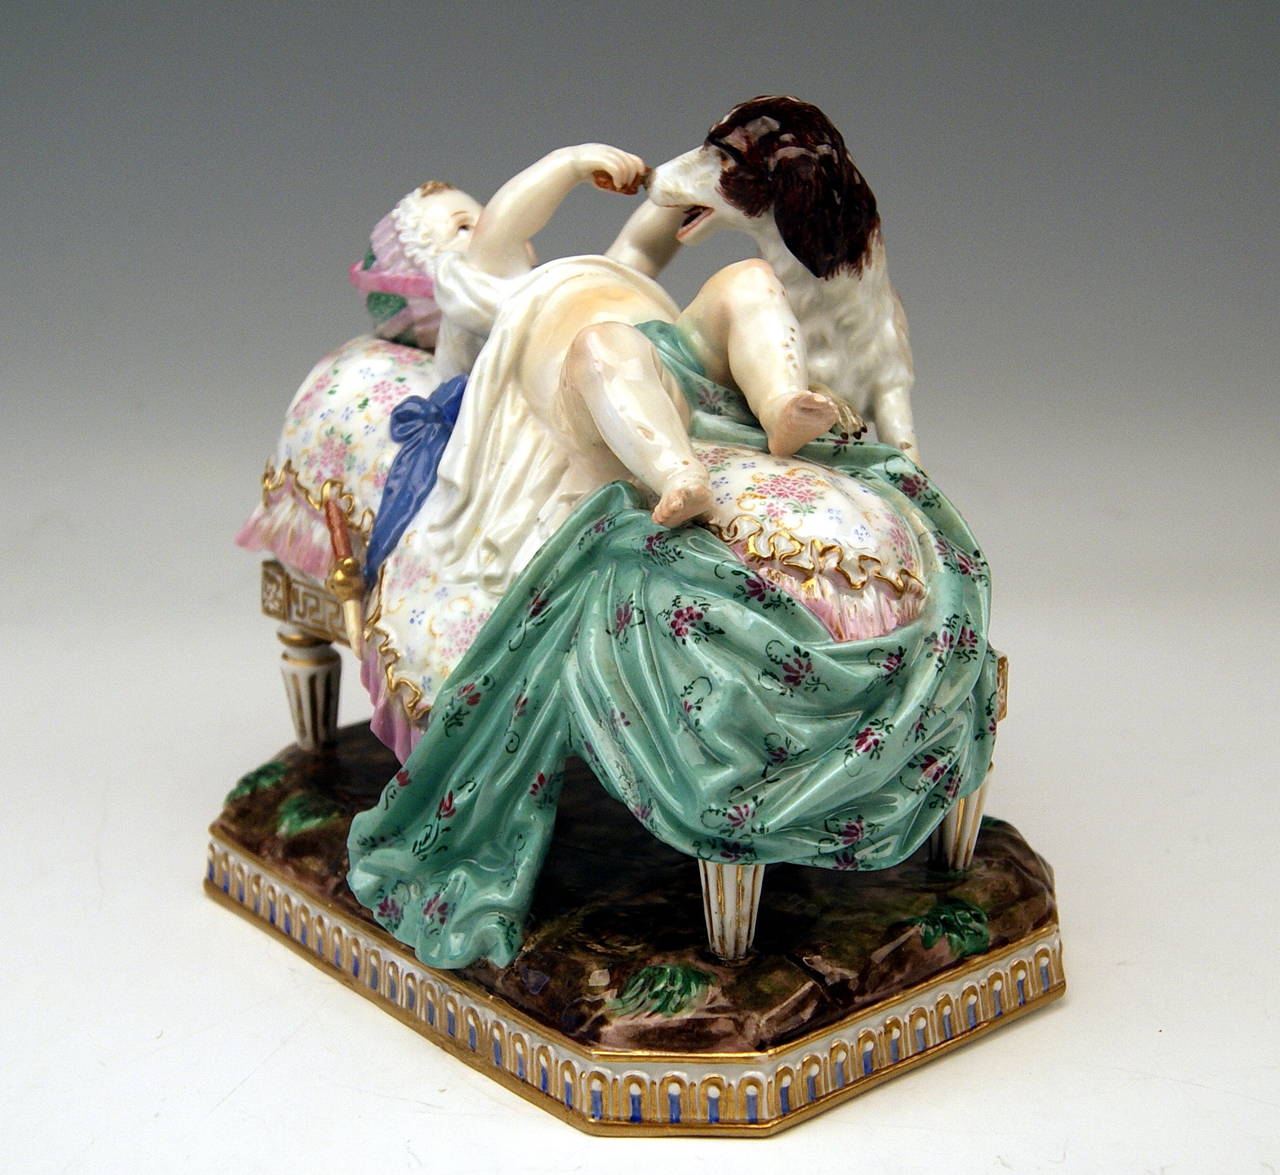 Meissen Gorgeous Figurine Group created by Michel Victor Acier
(1736 - 1799)  around the year 1774:  Placidness of Childhood

Specifications:
A most lovely baby child lies on an upholstered chaise longue: It plays with
a dog supporting itself